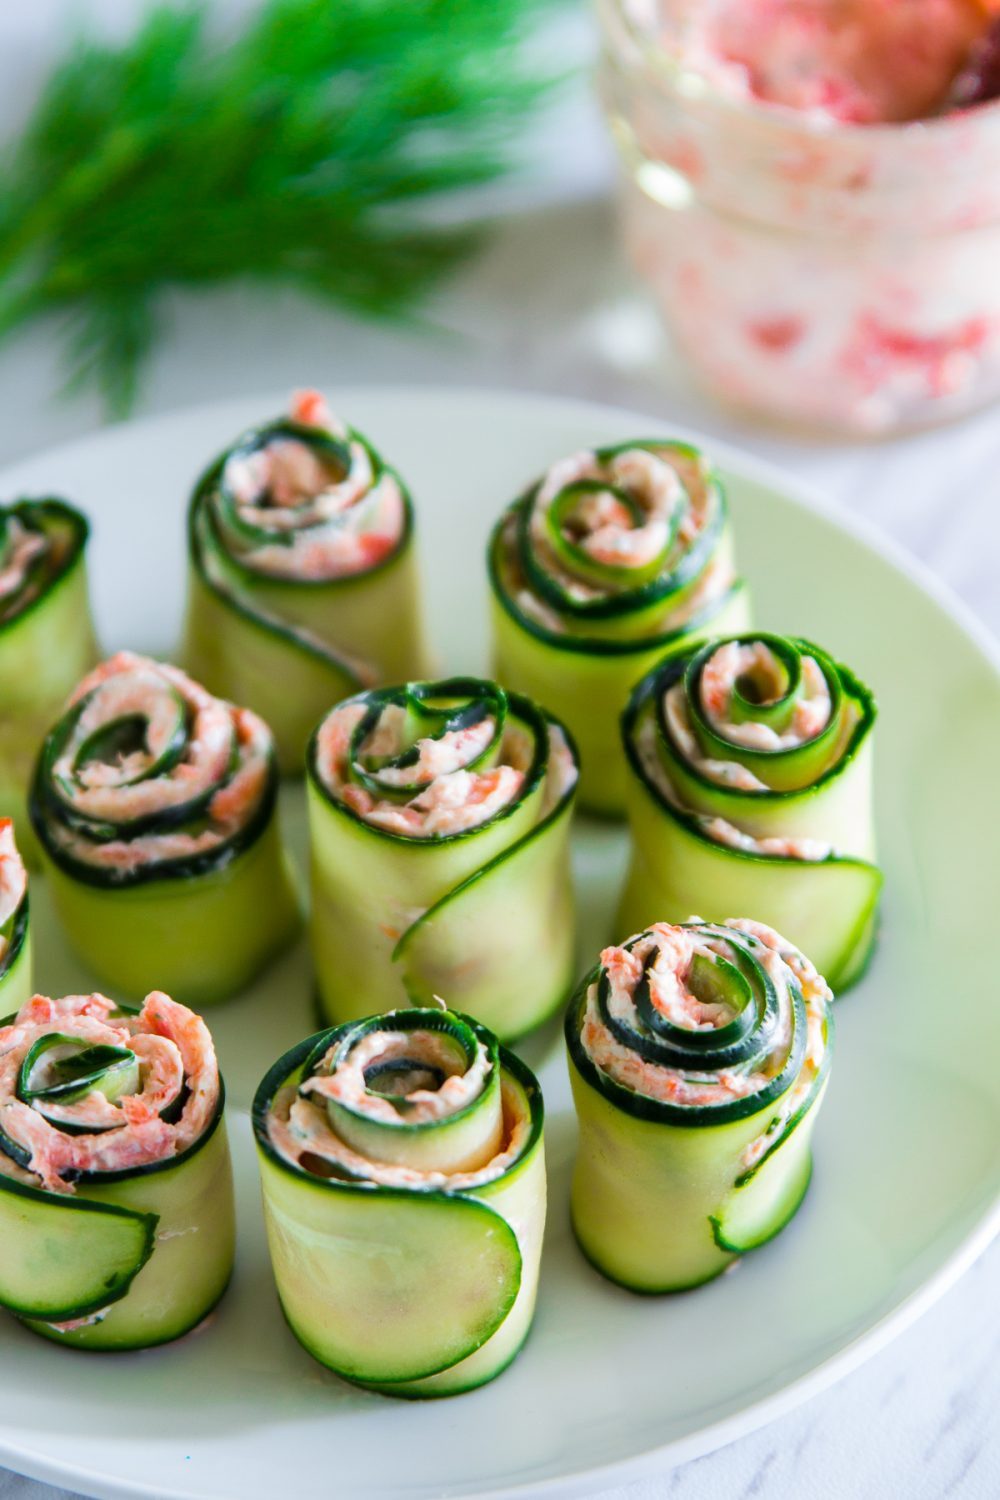 Cucumber Appetizers With Dill And Cream Cheese
 Smoked Salmon Cucumber Appetizer VIDEO Simply Home Cooked